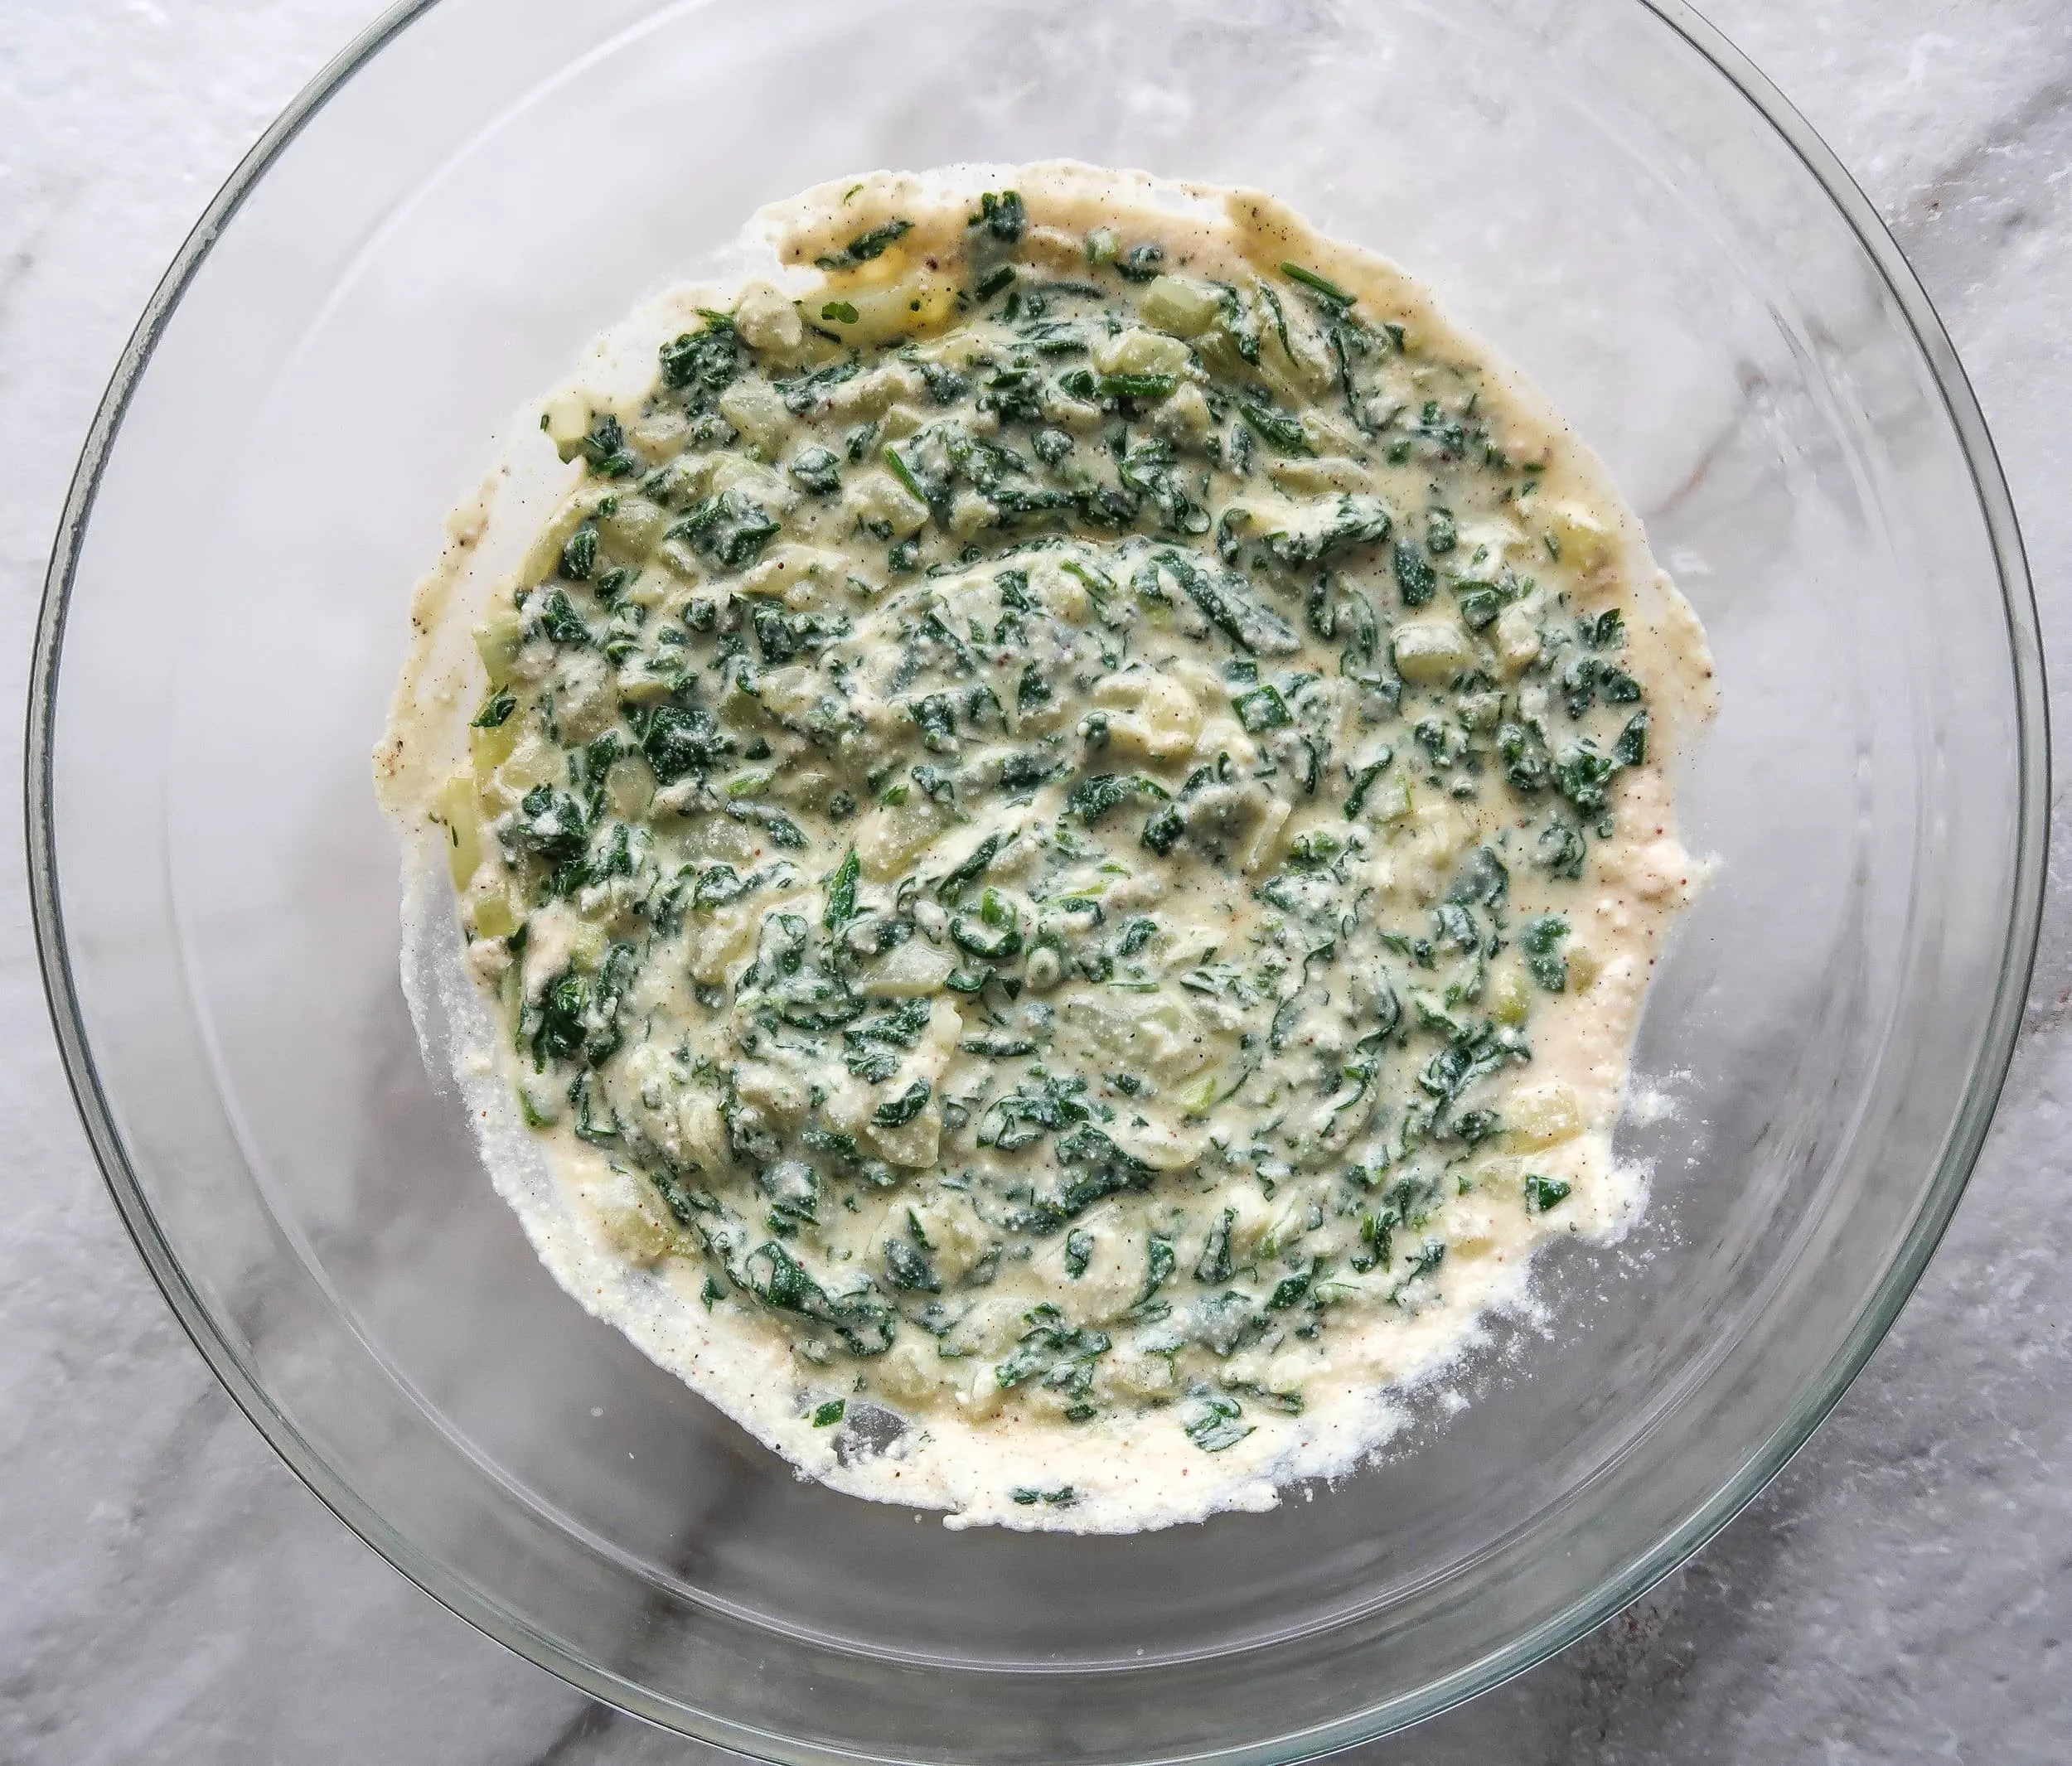 A spinach and ricotta mixture in a bowl.